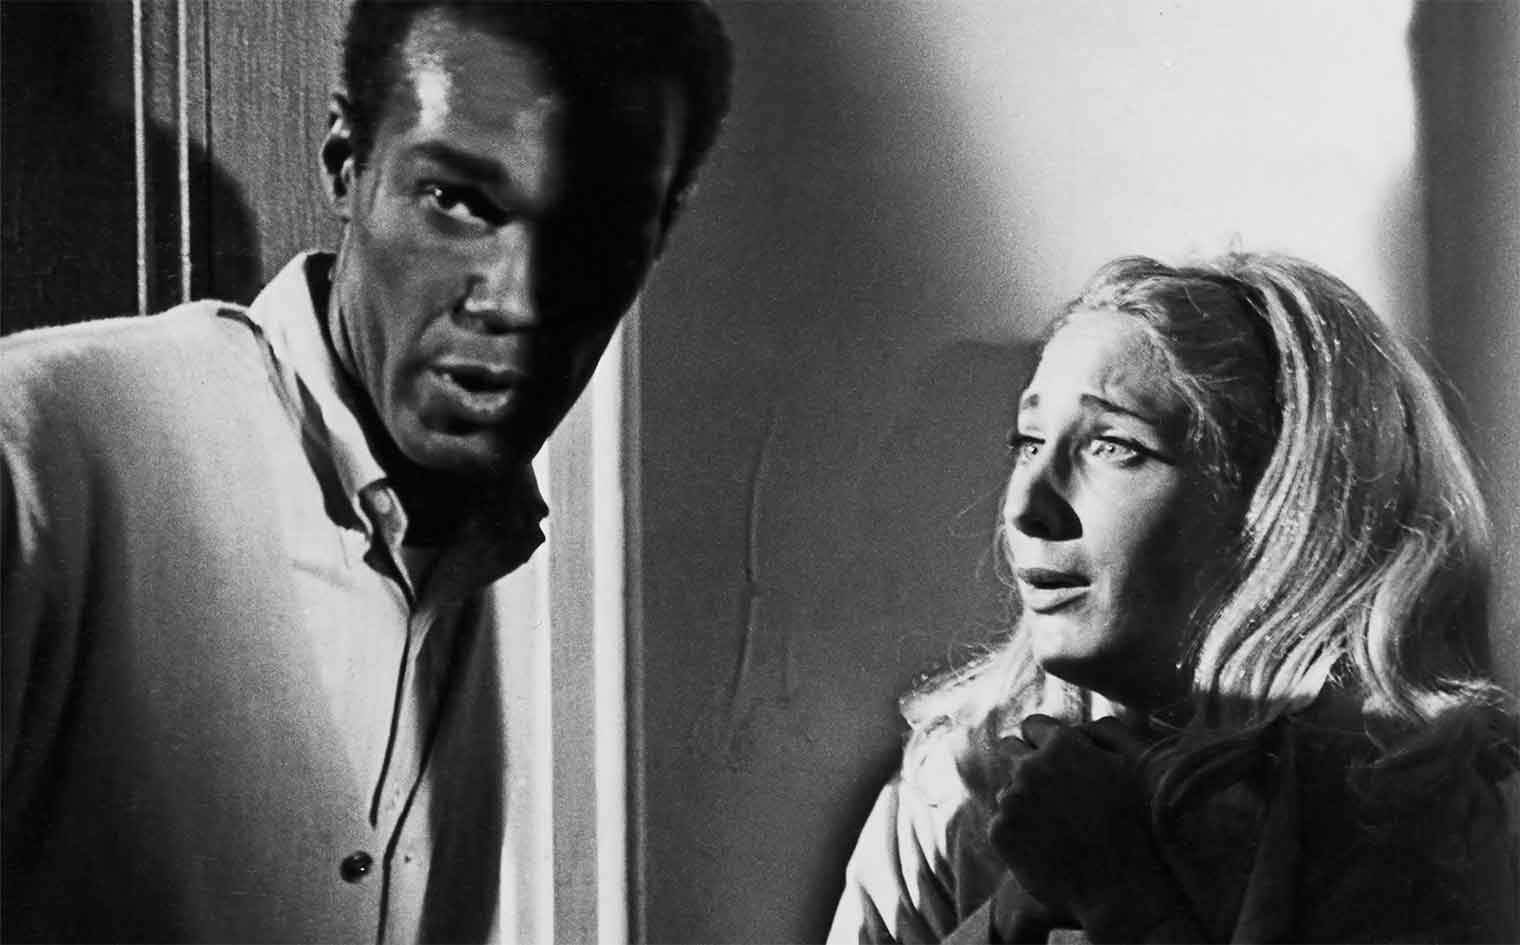 Still of uane Jones and Judith O'Dea from the 1968 film Night of the Living Dead